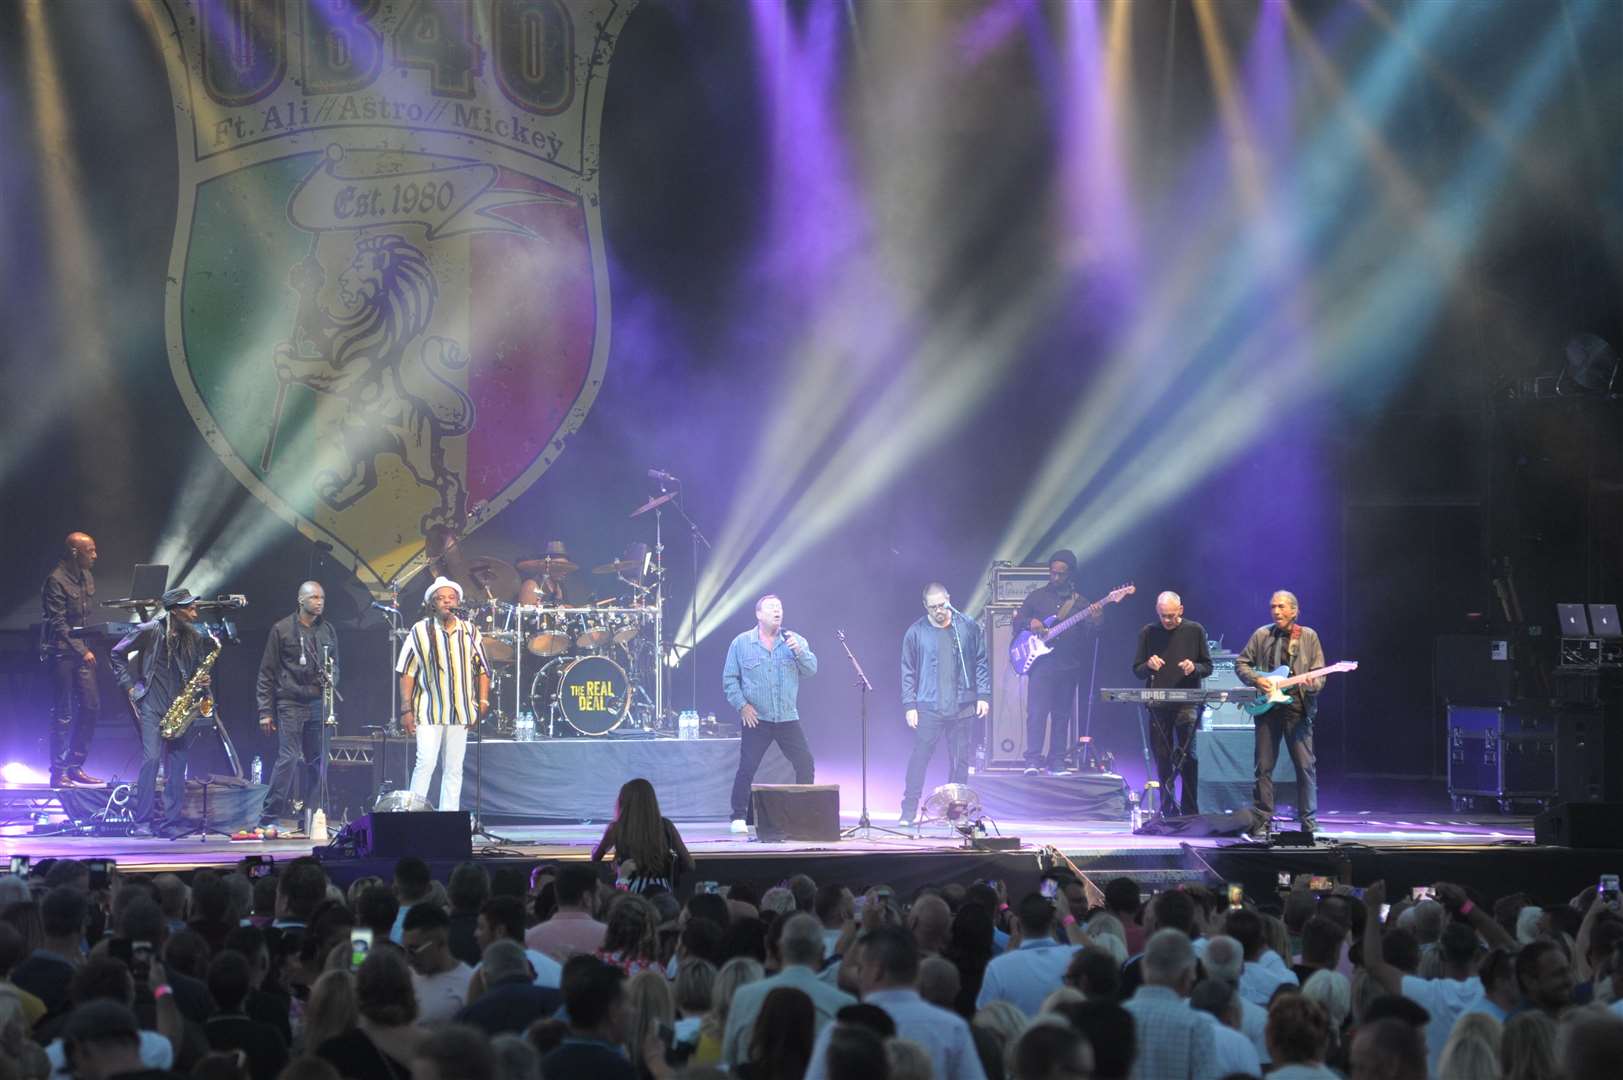 UB40 performing at the concerts in 2018